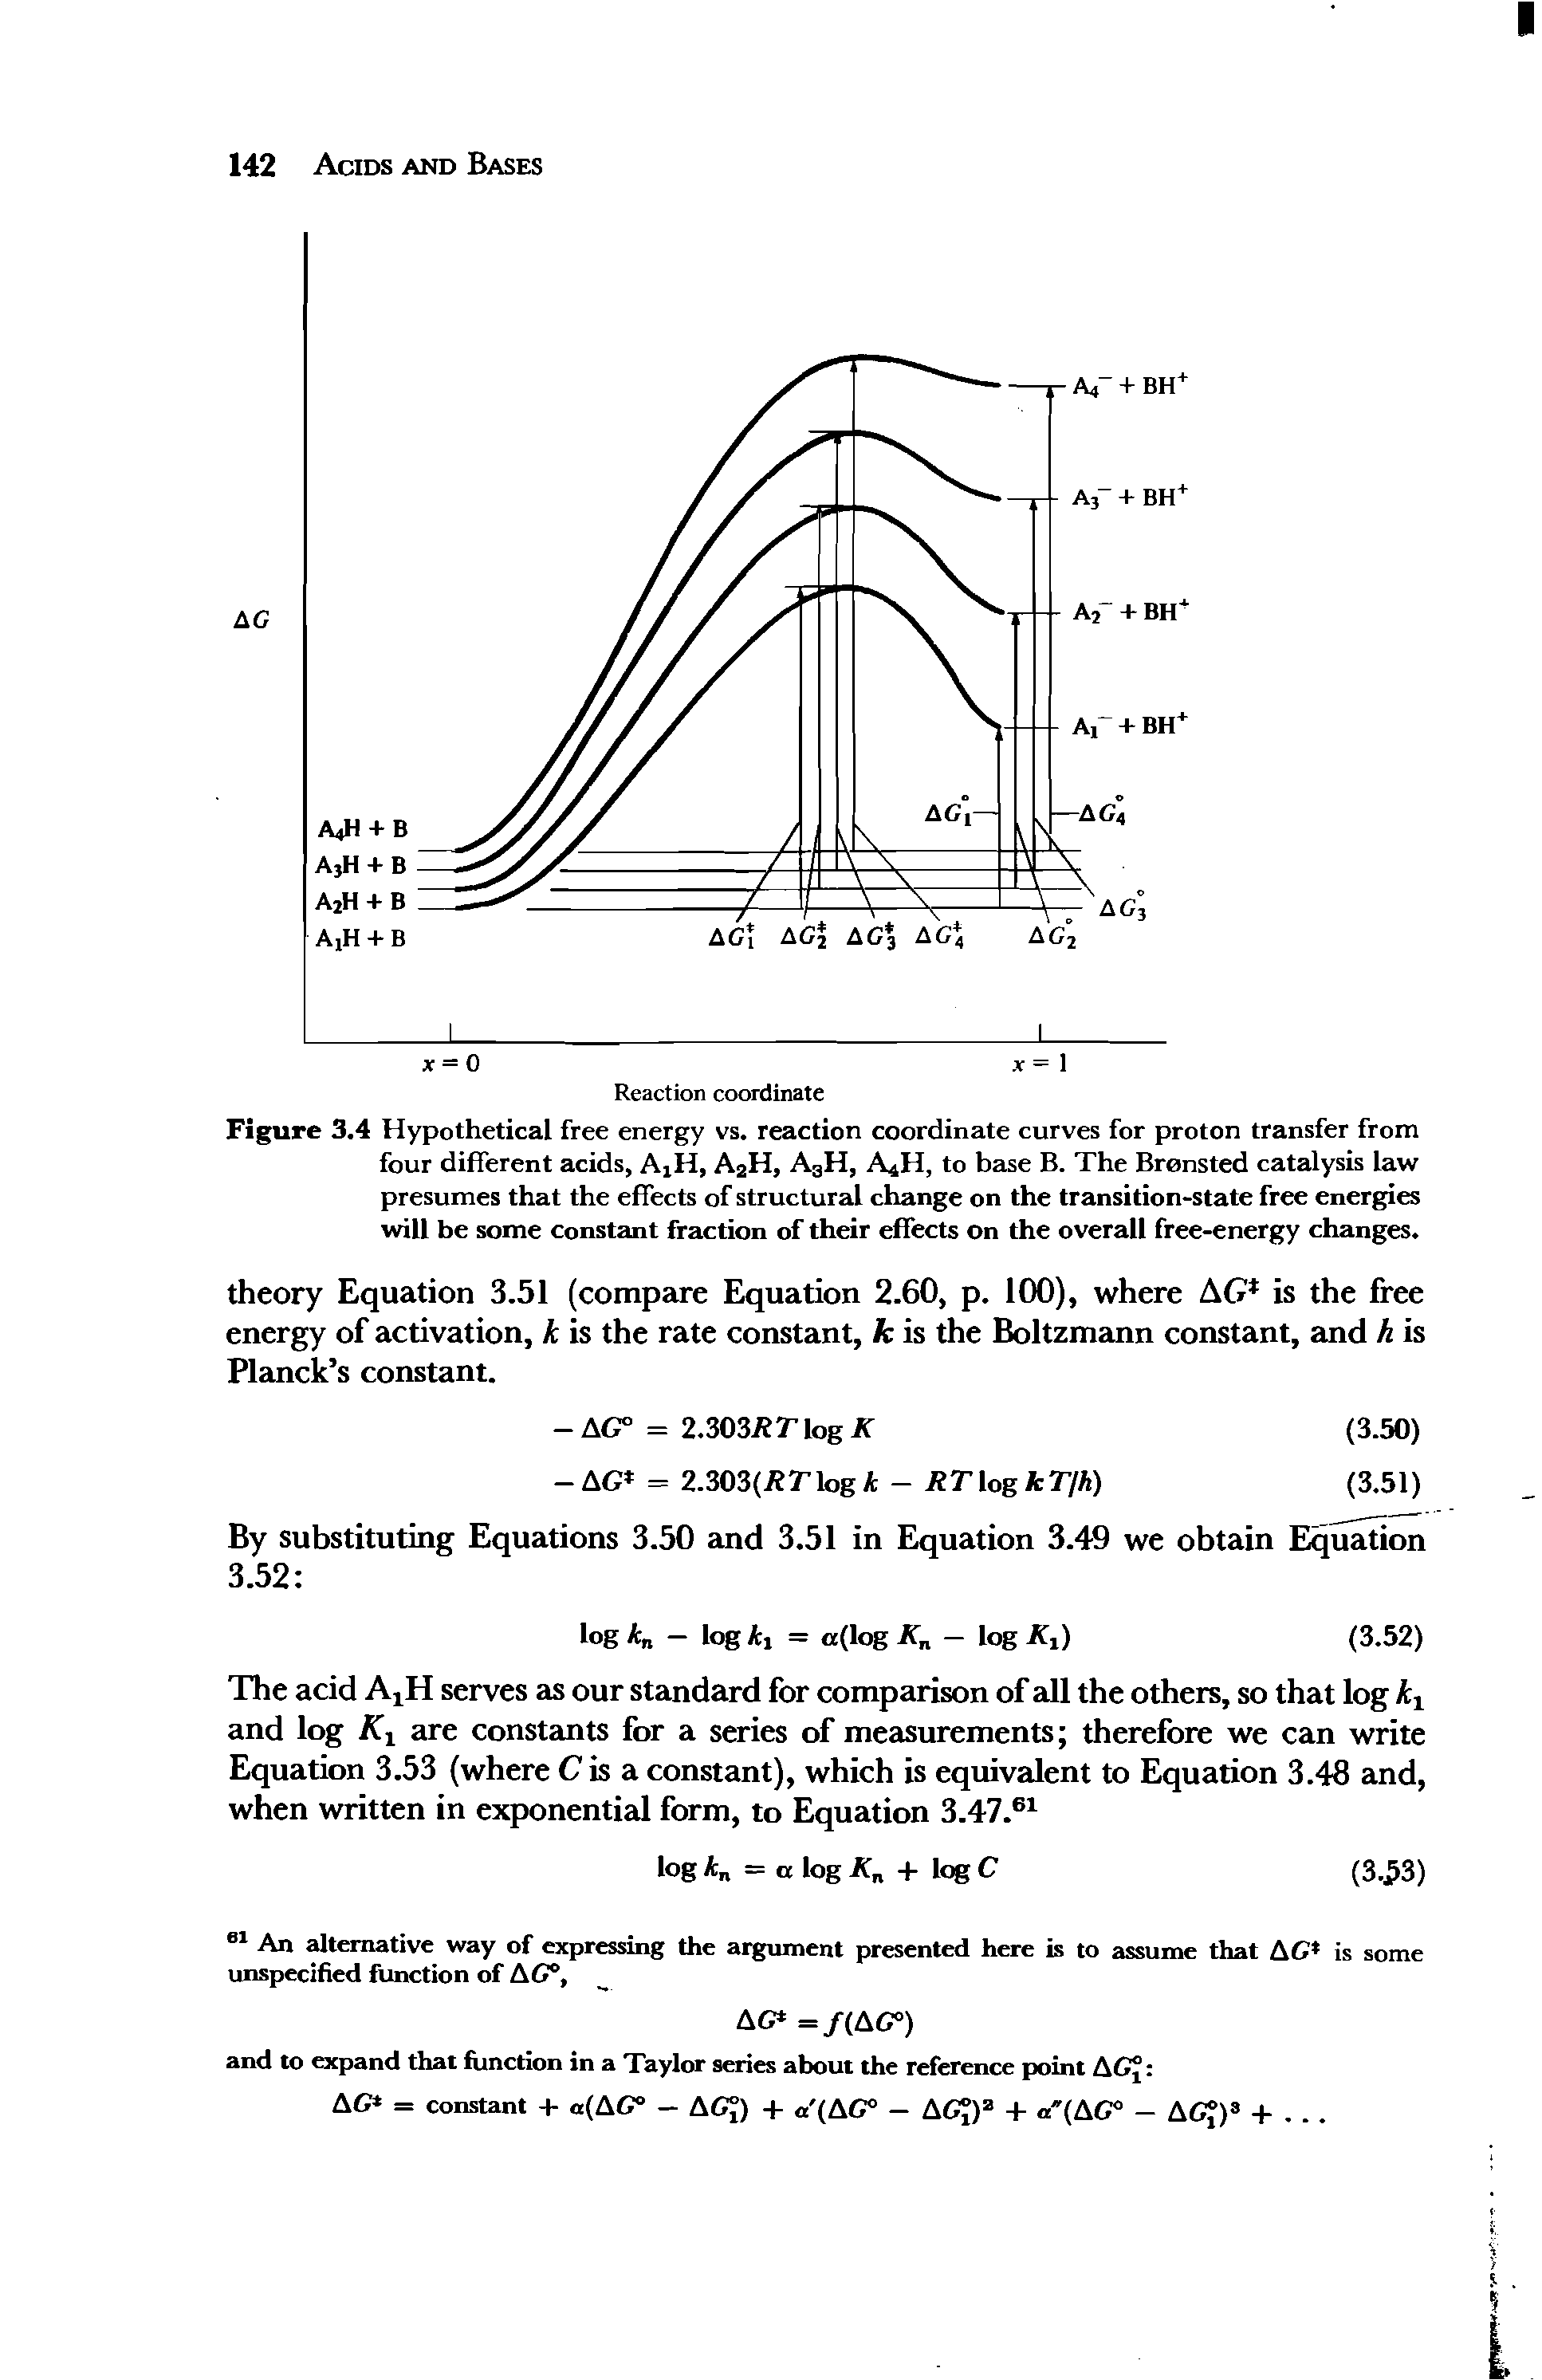 Figure 3.4 Hypothetical free energy vs. reaction coordinate curves for proton transfer from four different acids, AxH, A2H, A3H, A4II, to base B. The Bronsted catalysis law presumes that the effects of structural change on the transition-state free energies will be some constant fraction of their effects on the overall free-energy changes.